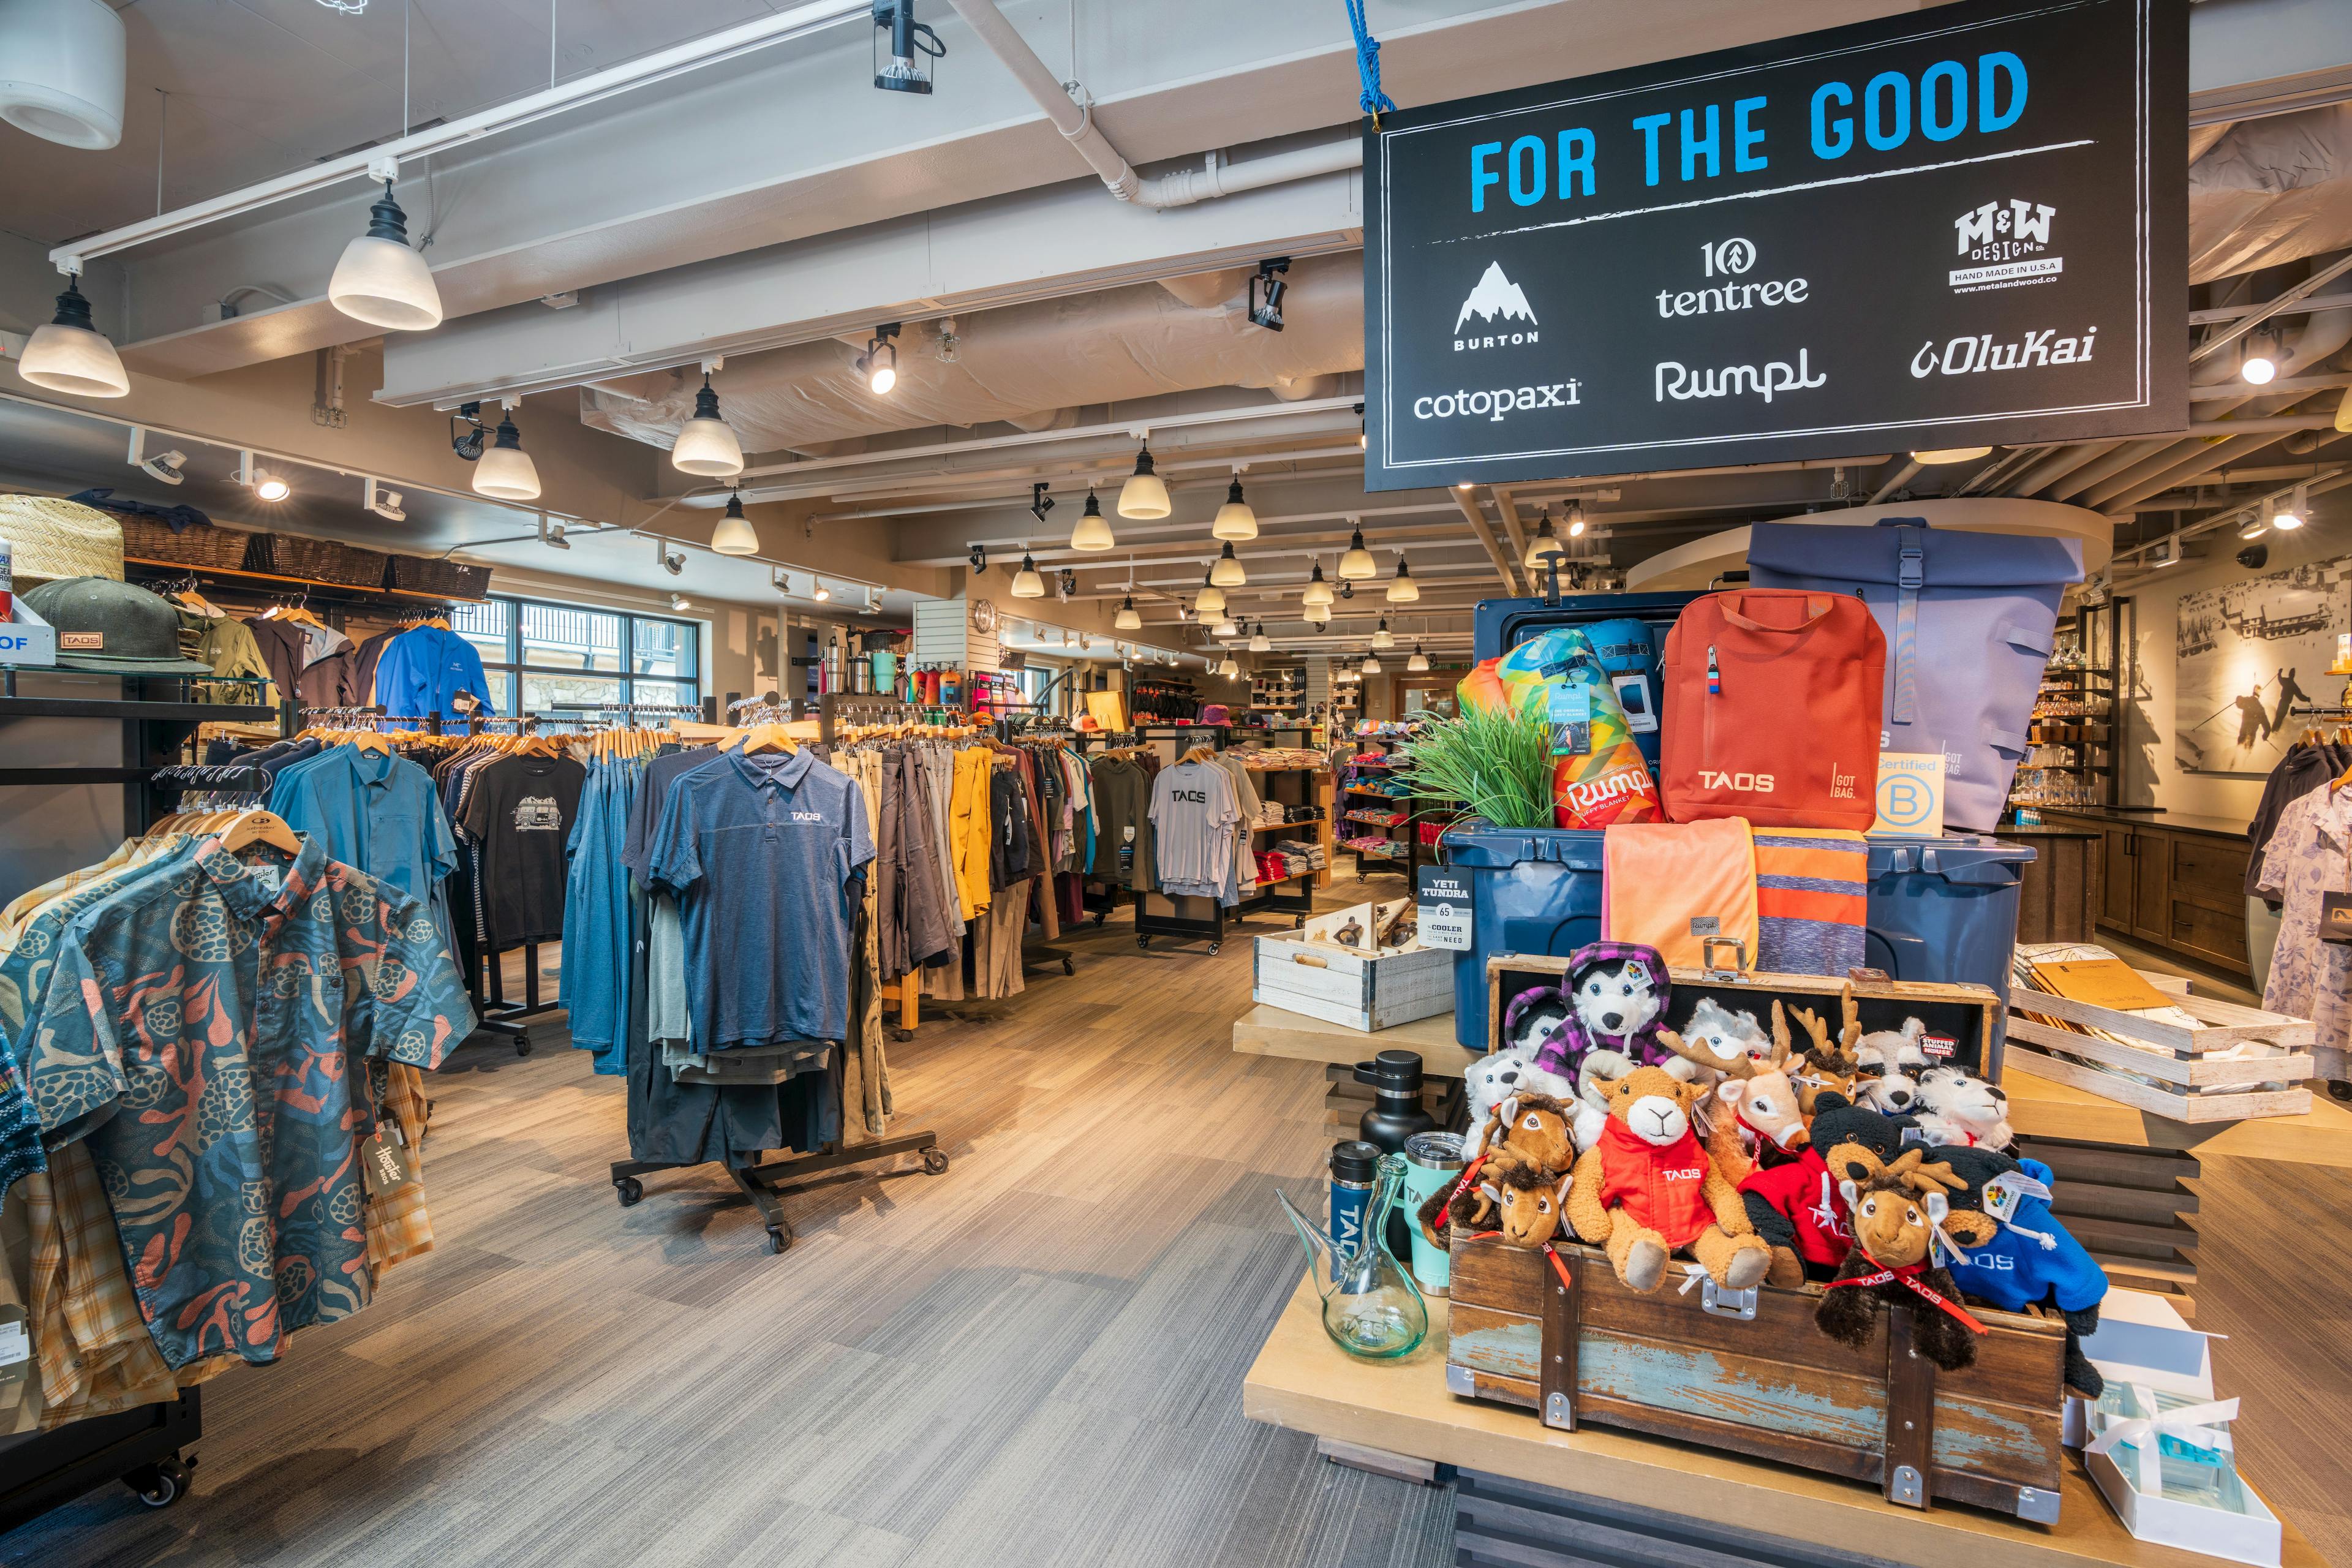 Interior shot of Taos Sports store showing branded outdoor clothing and gear